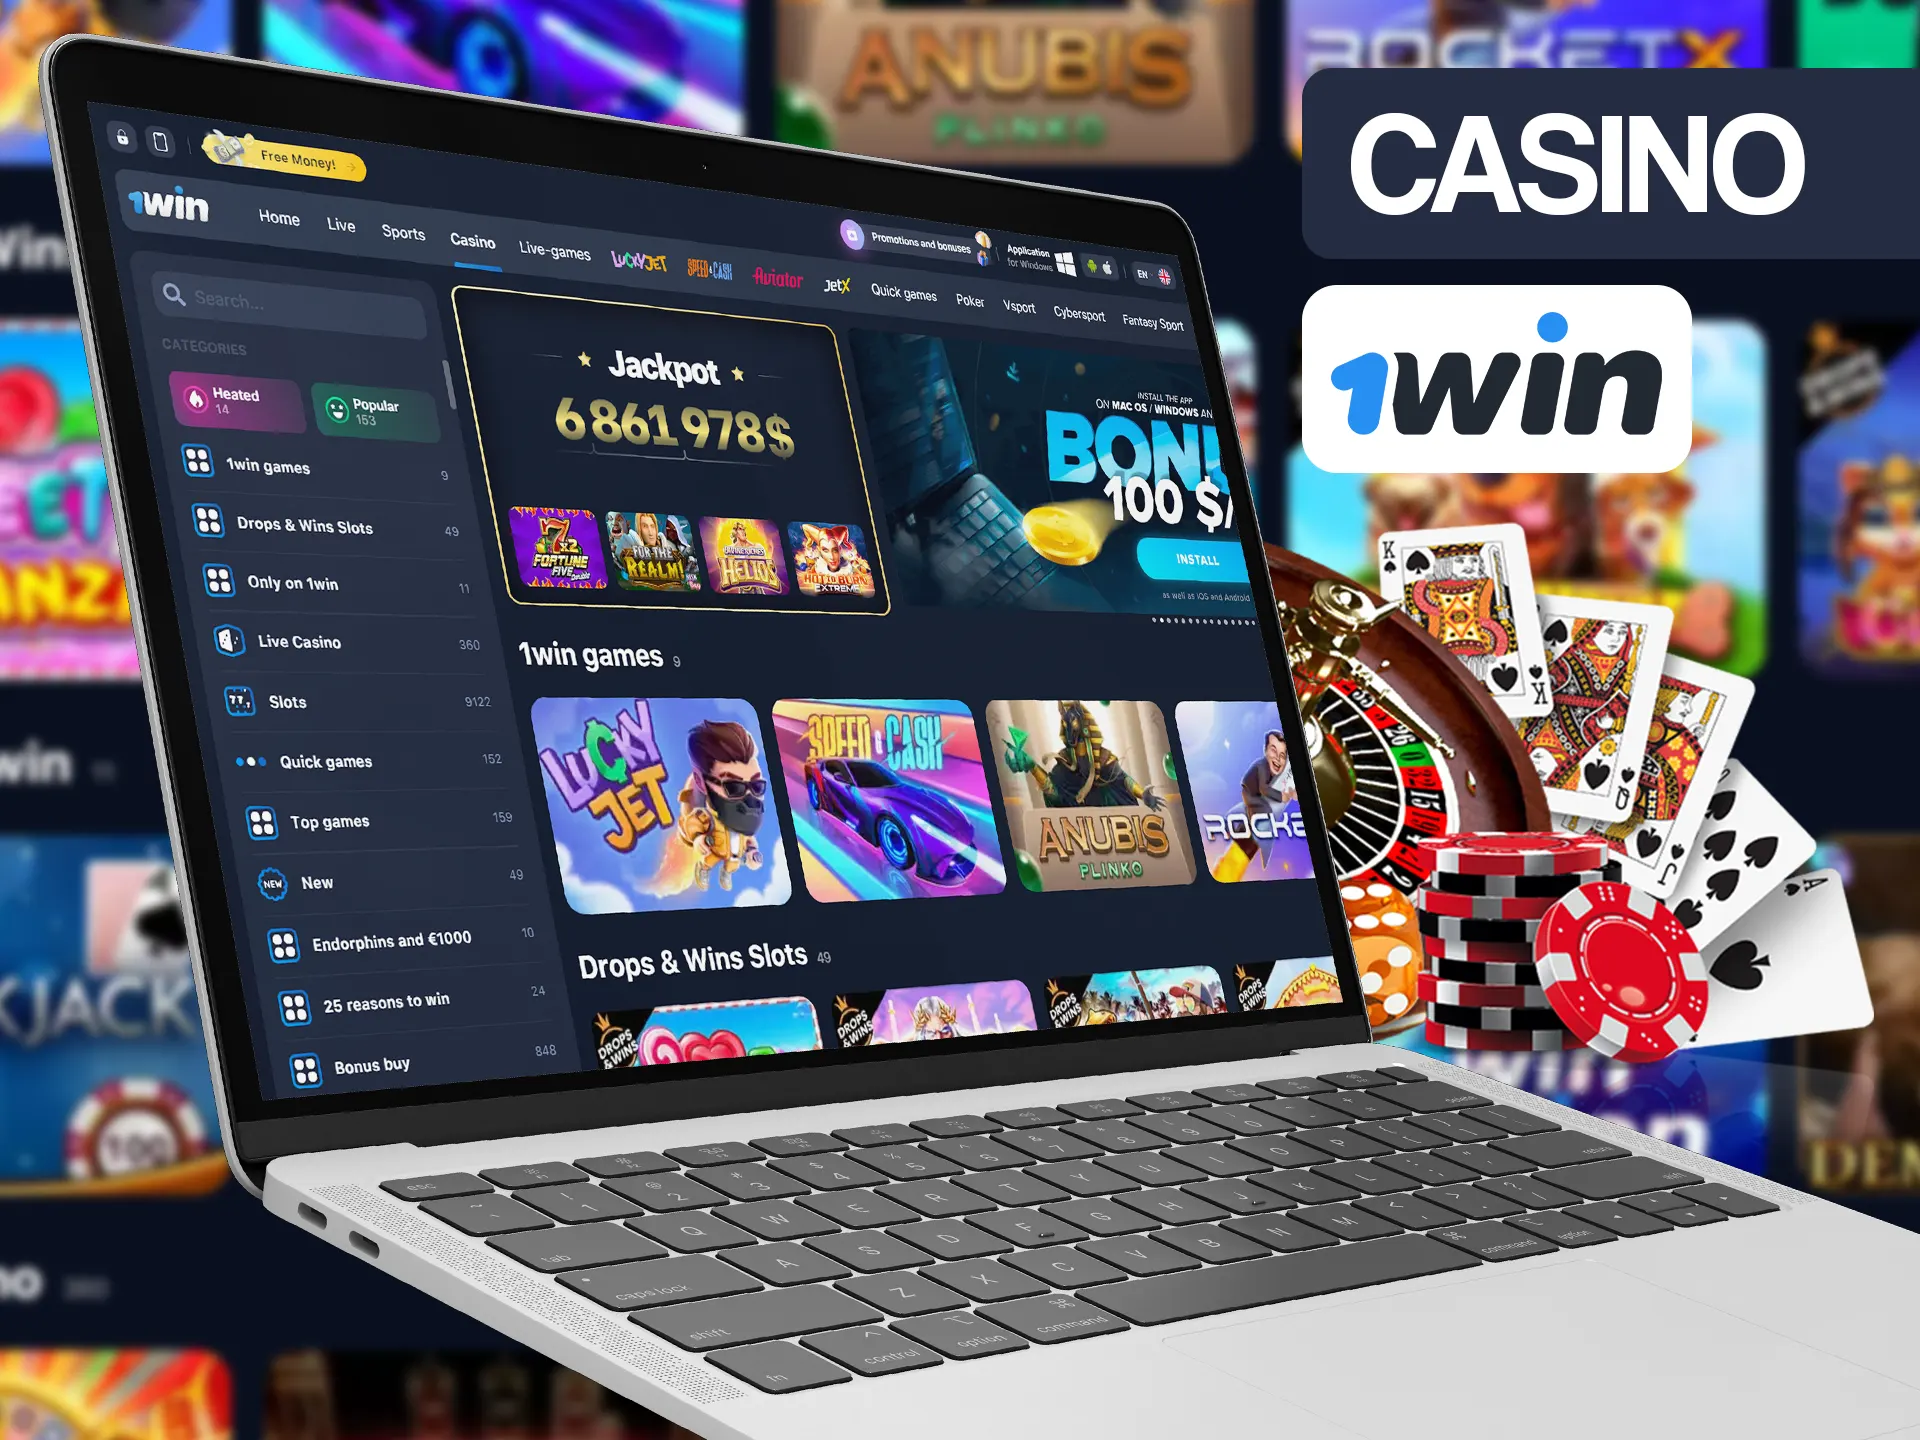 1win casino provides a lot of intresting games to play.